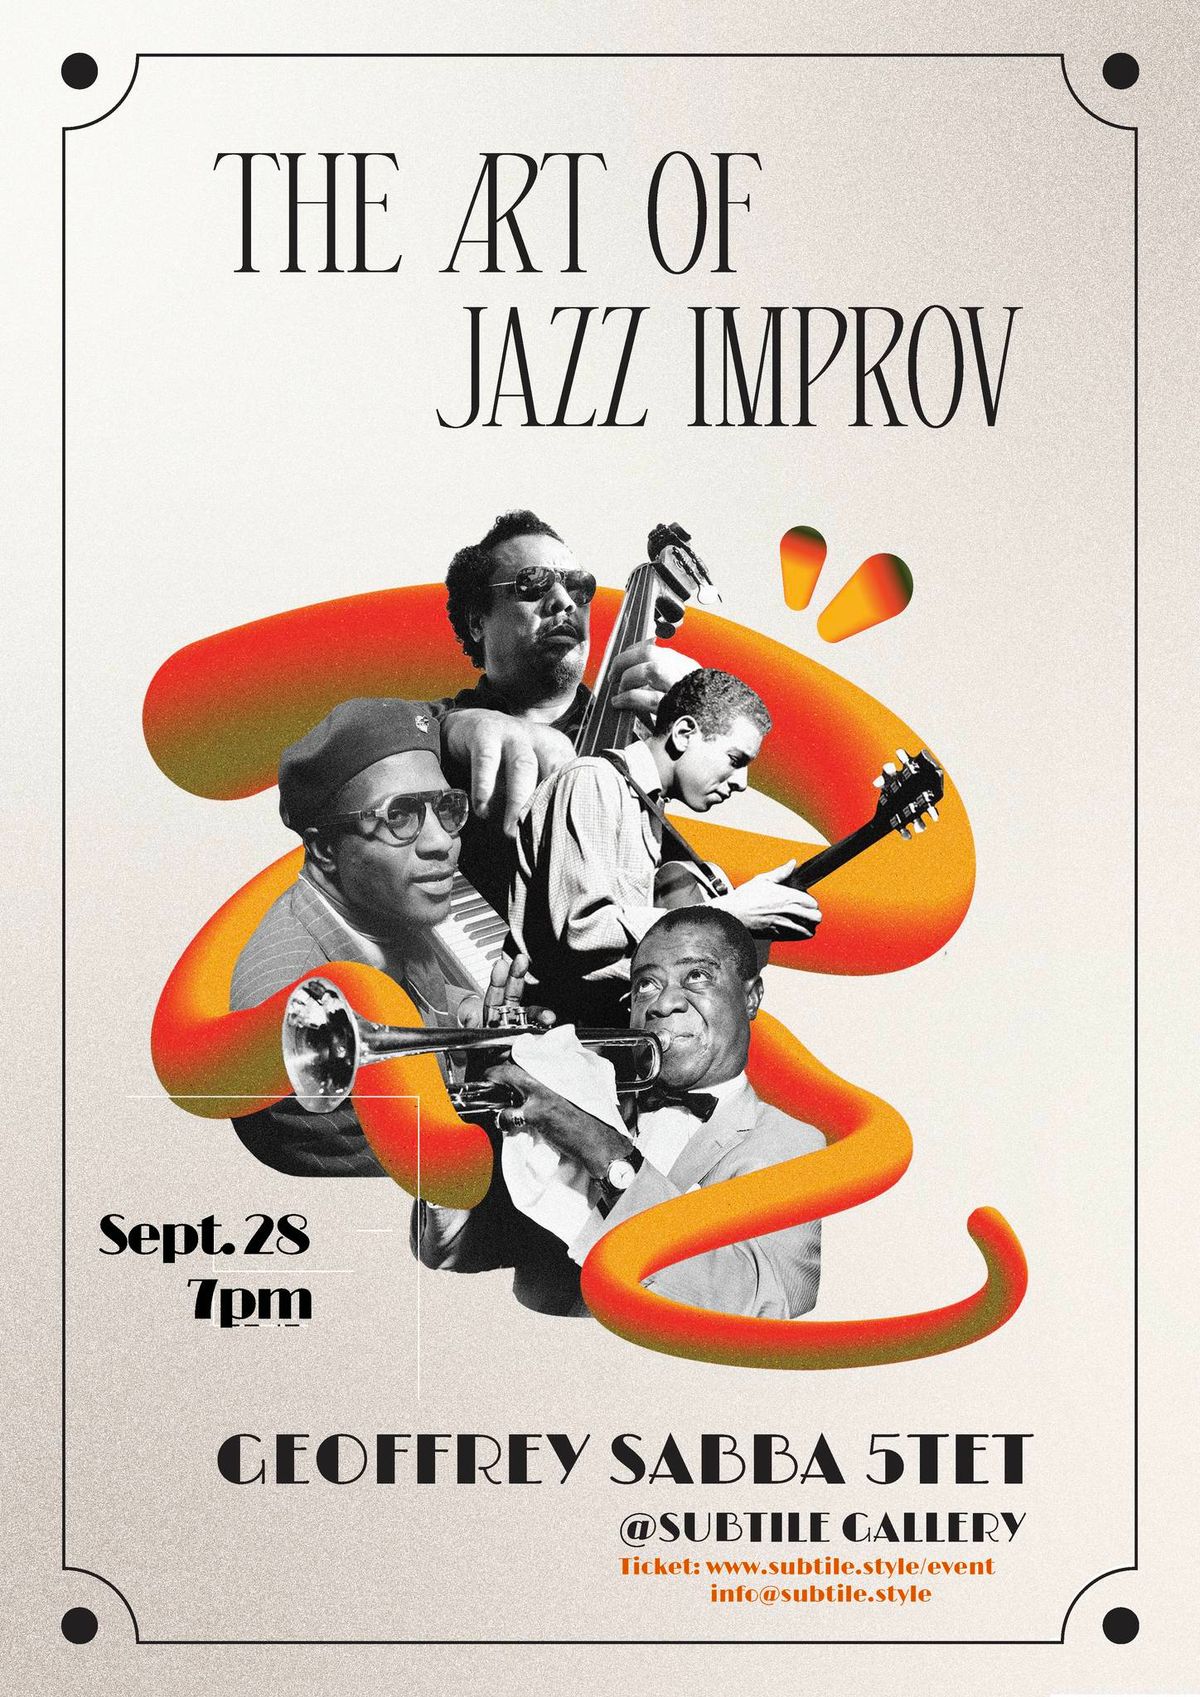 New Date! The Art of Jazz Improv and wine Evening with Geoffrey Sabba 5tet